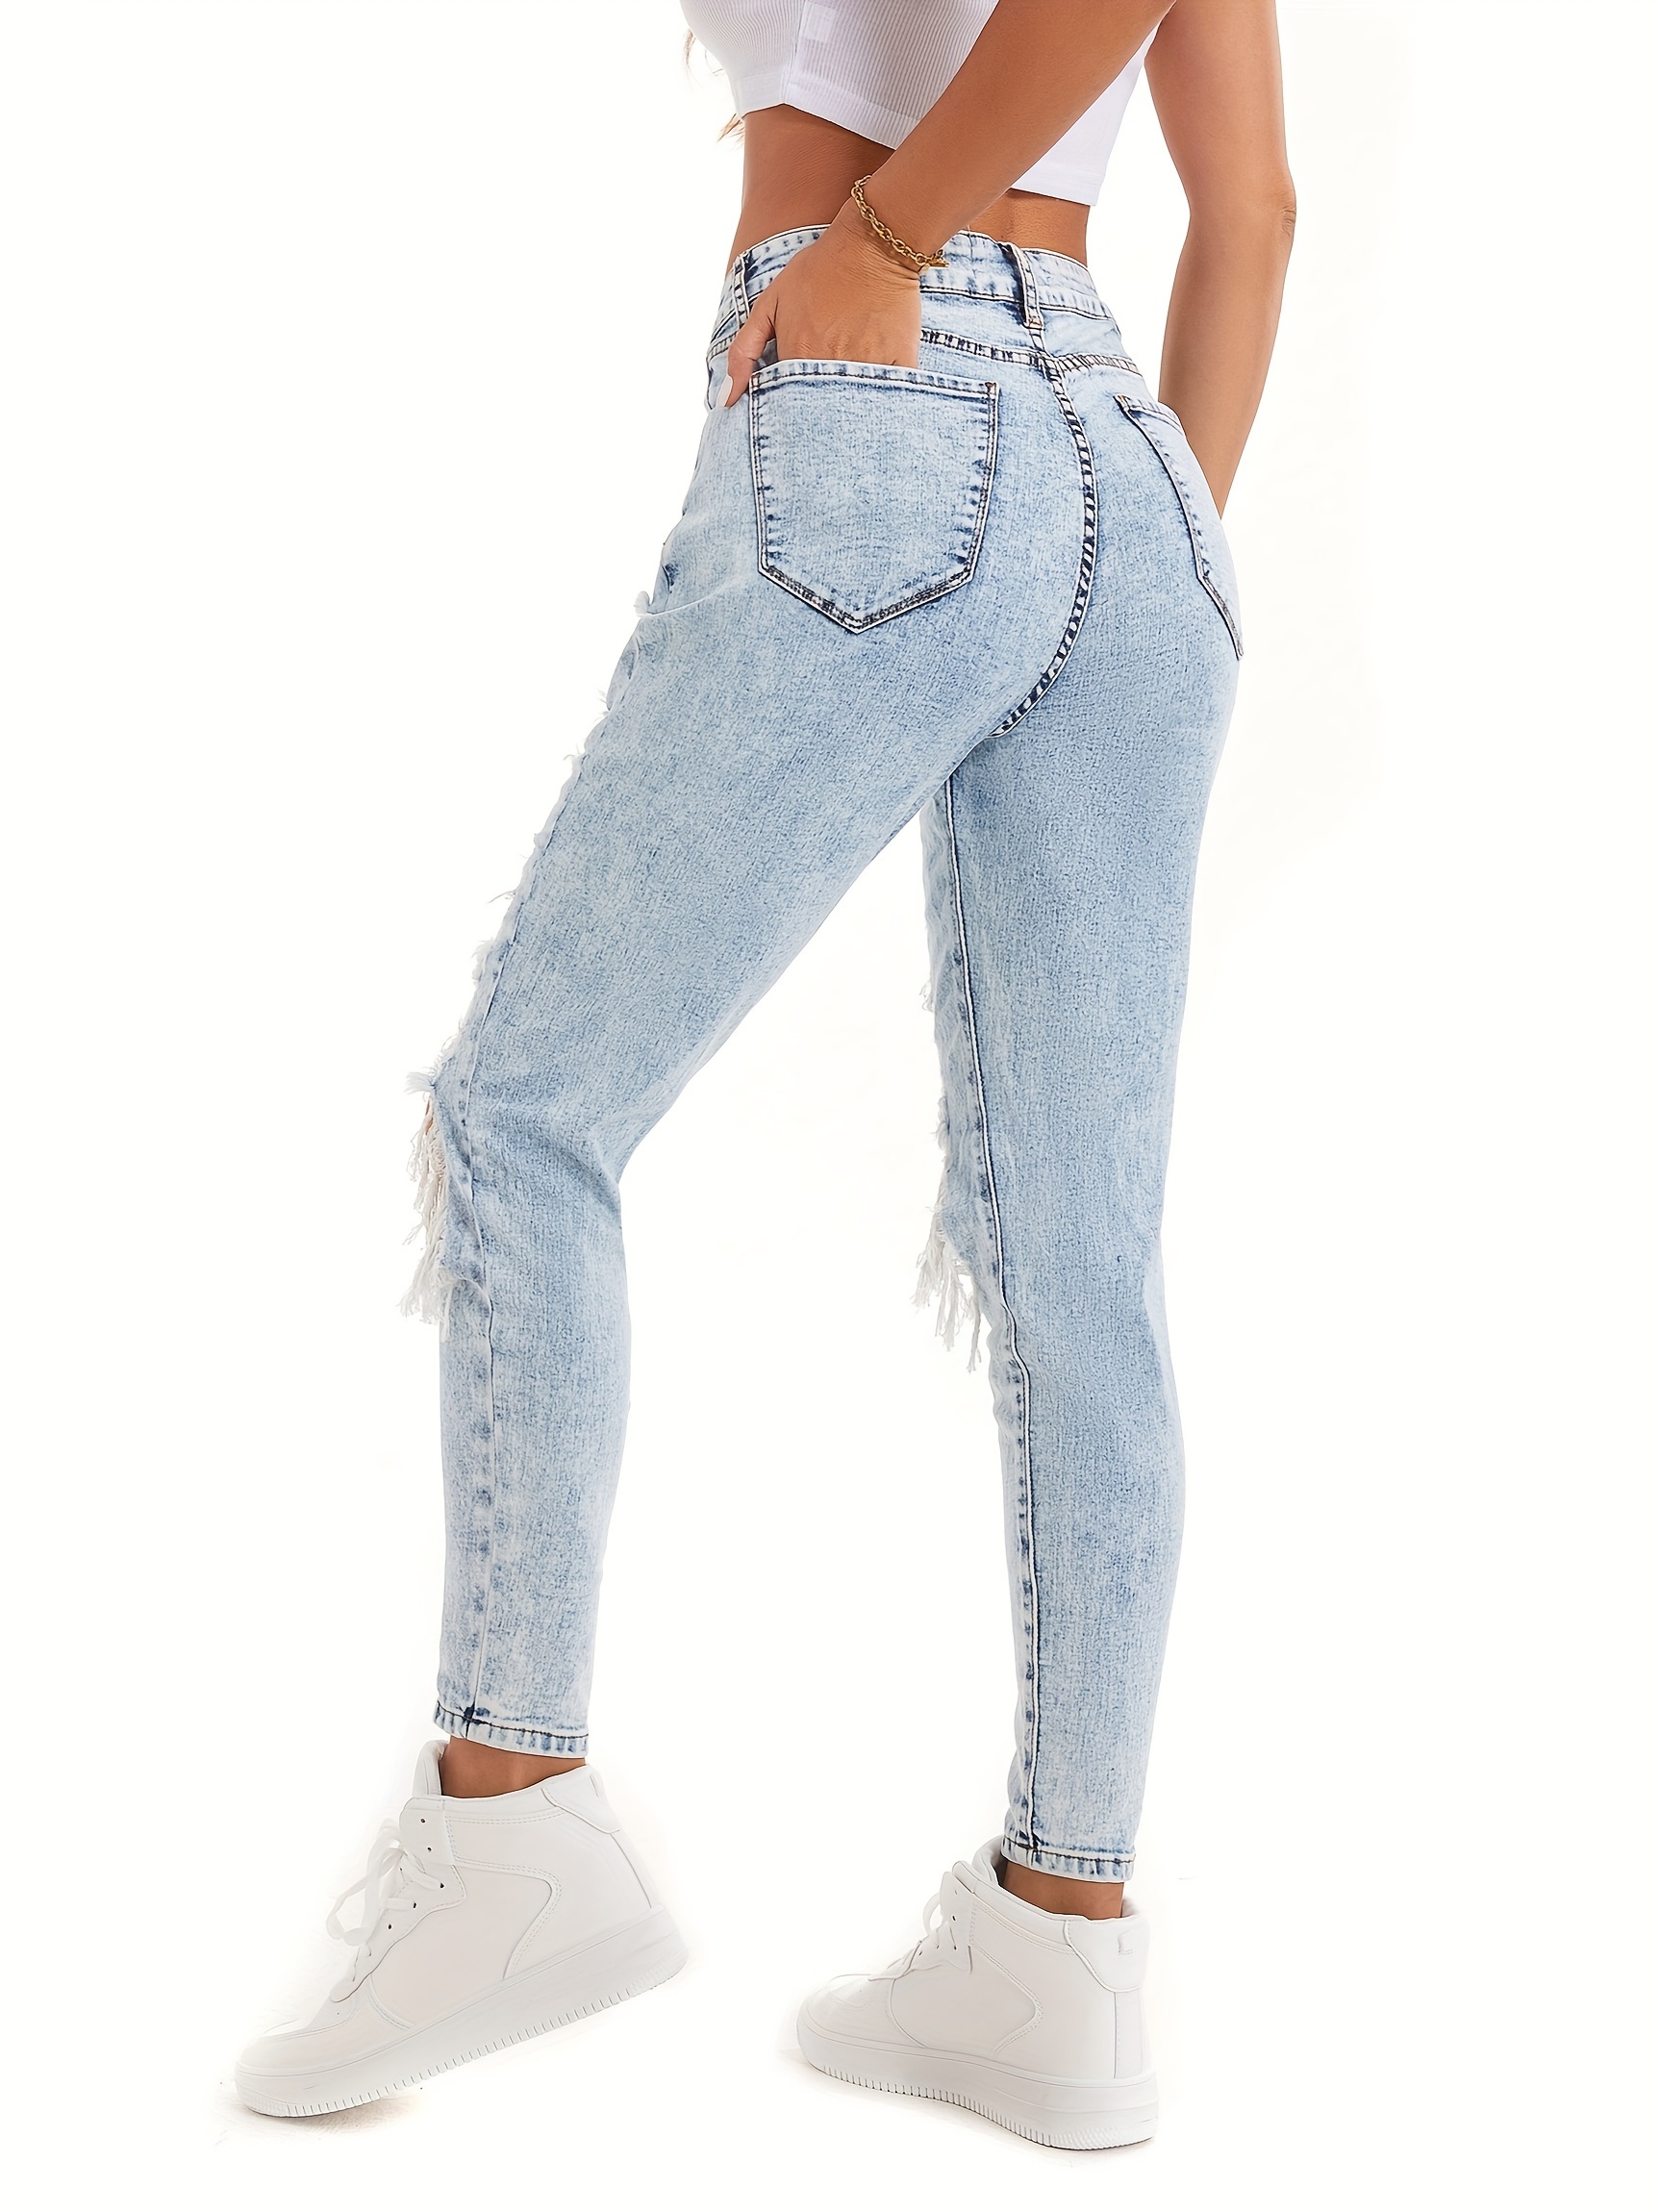 Ripped Holes Washed Skinny Jeans, Slim Fit High Stretch Distressed